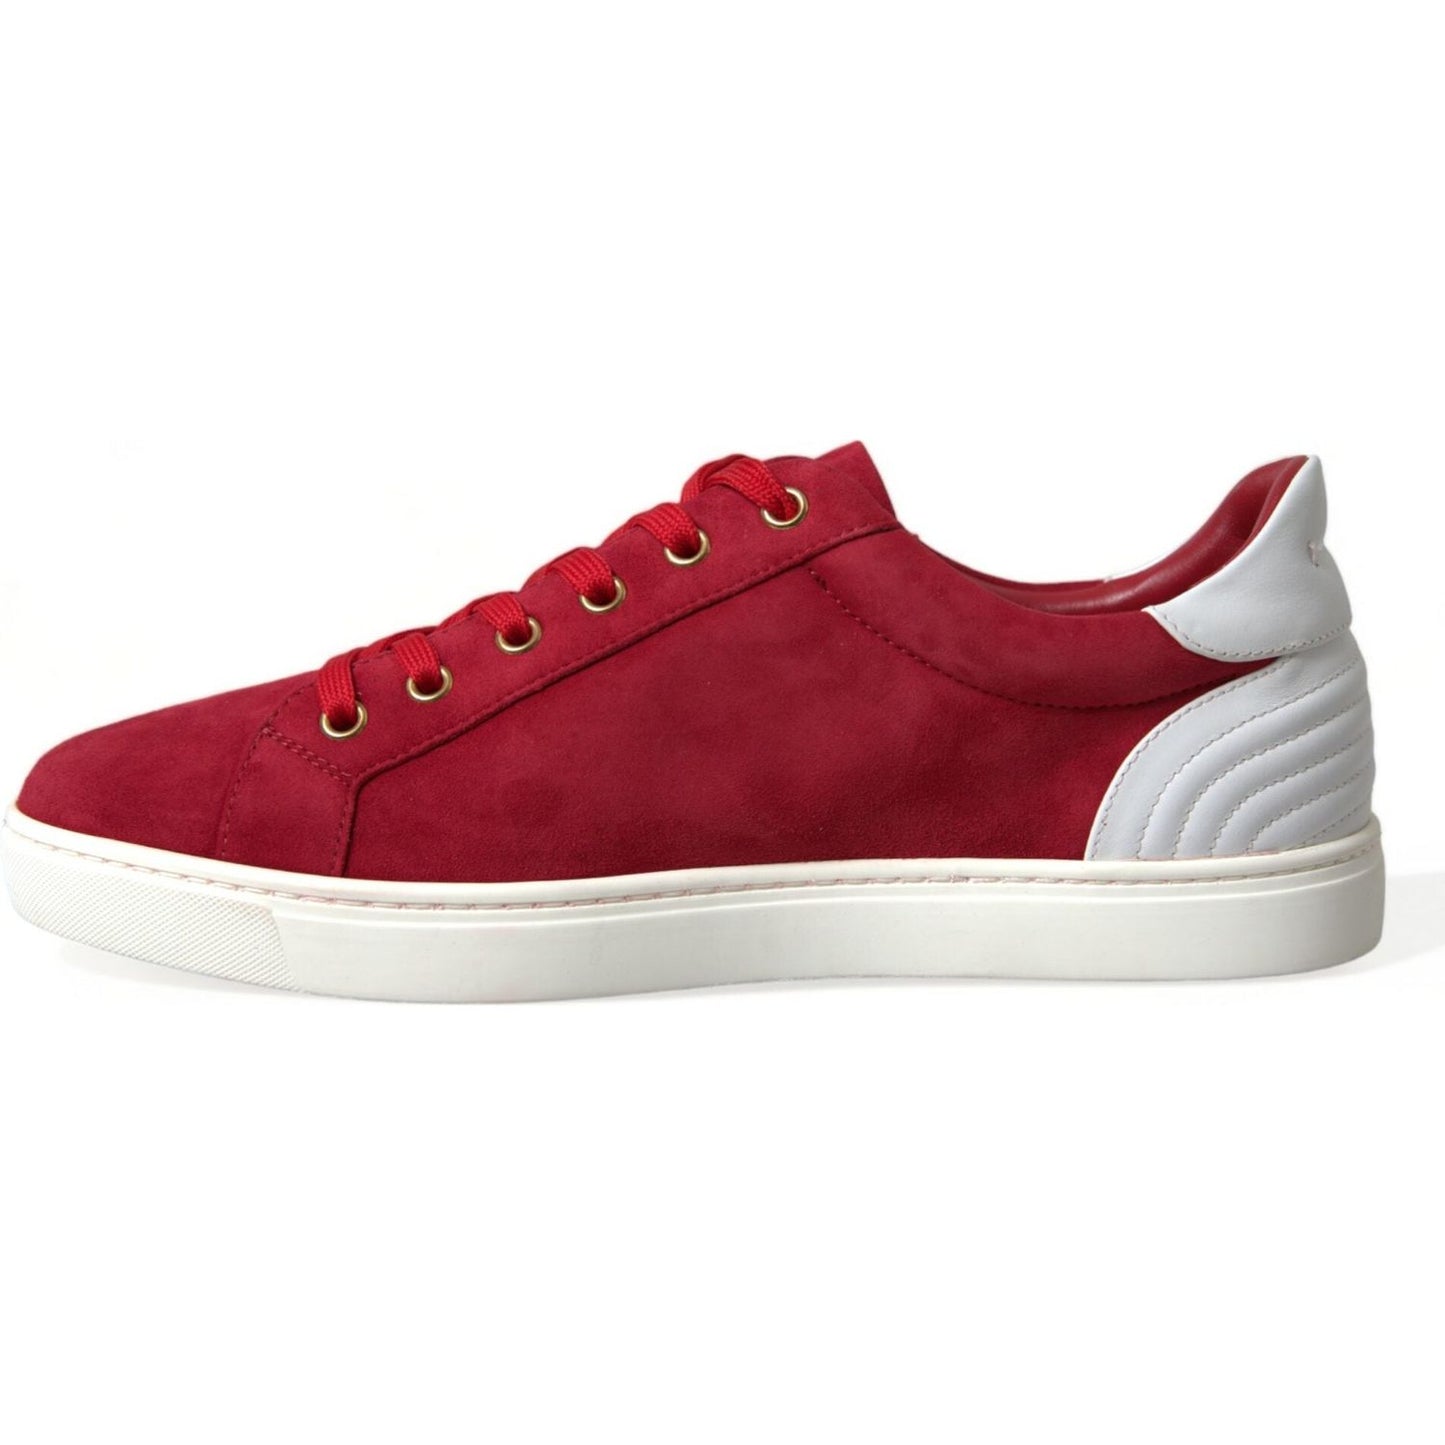 Dolce & Gabbana Elegant Red & White Leather Sneakers red-suede-leather-low-top-sneakers-shoes